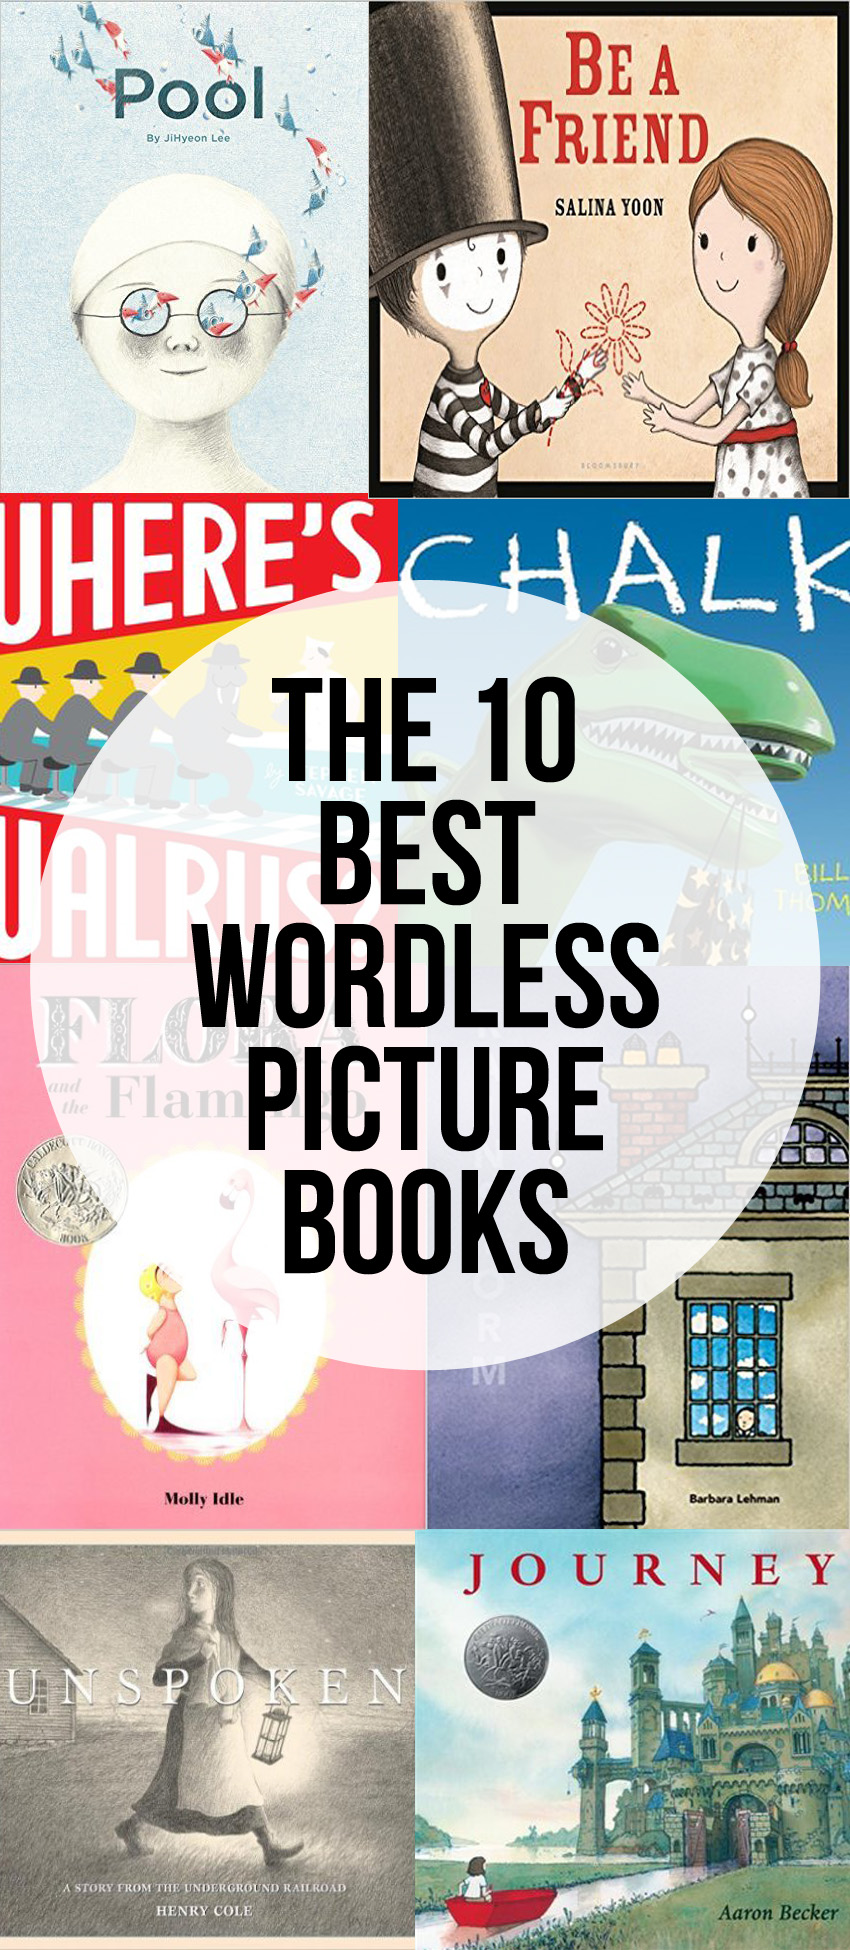 The Best Wordless Picture Books